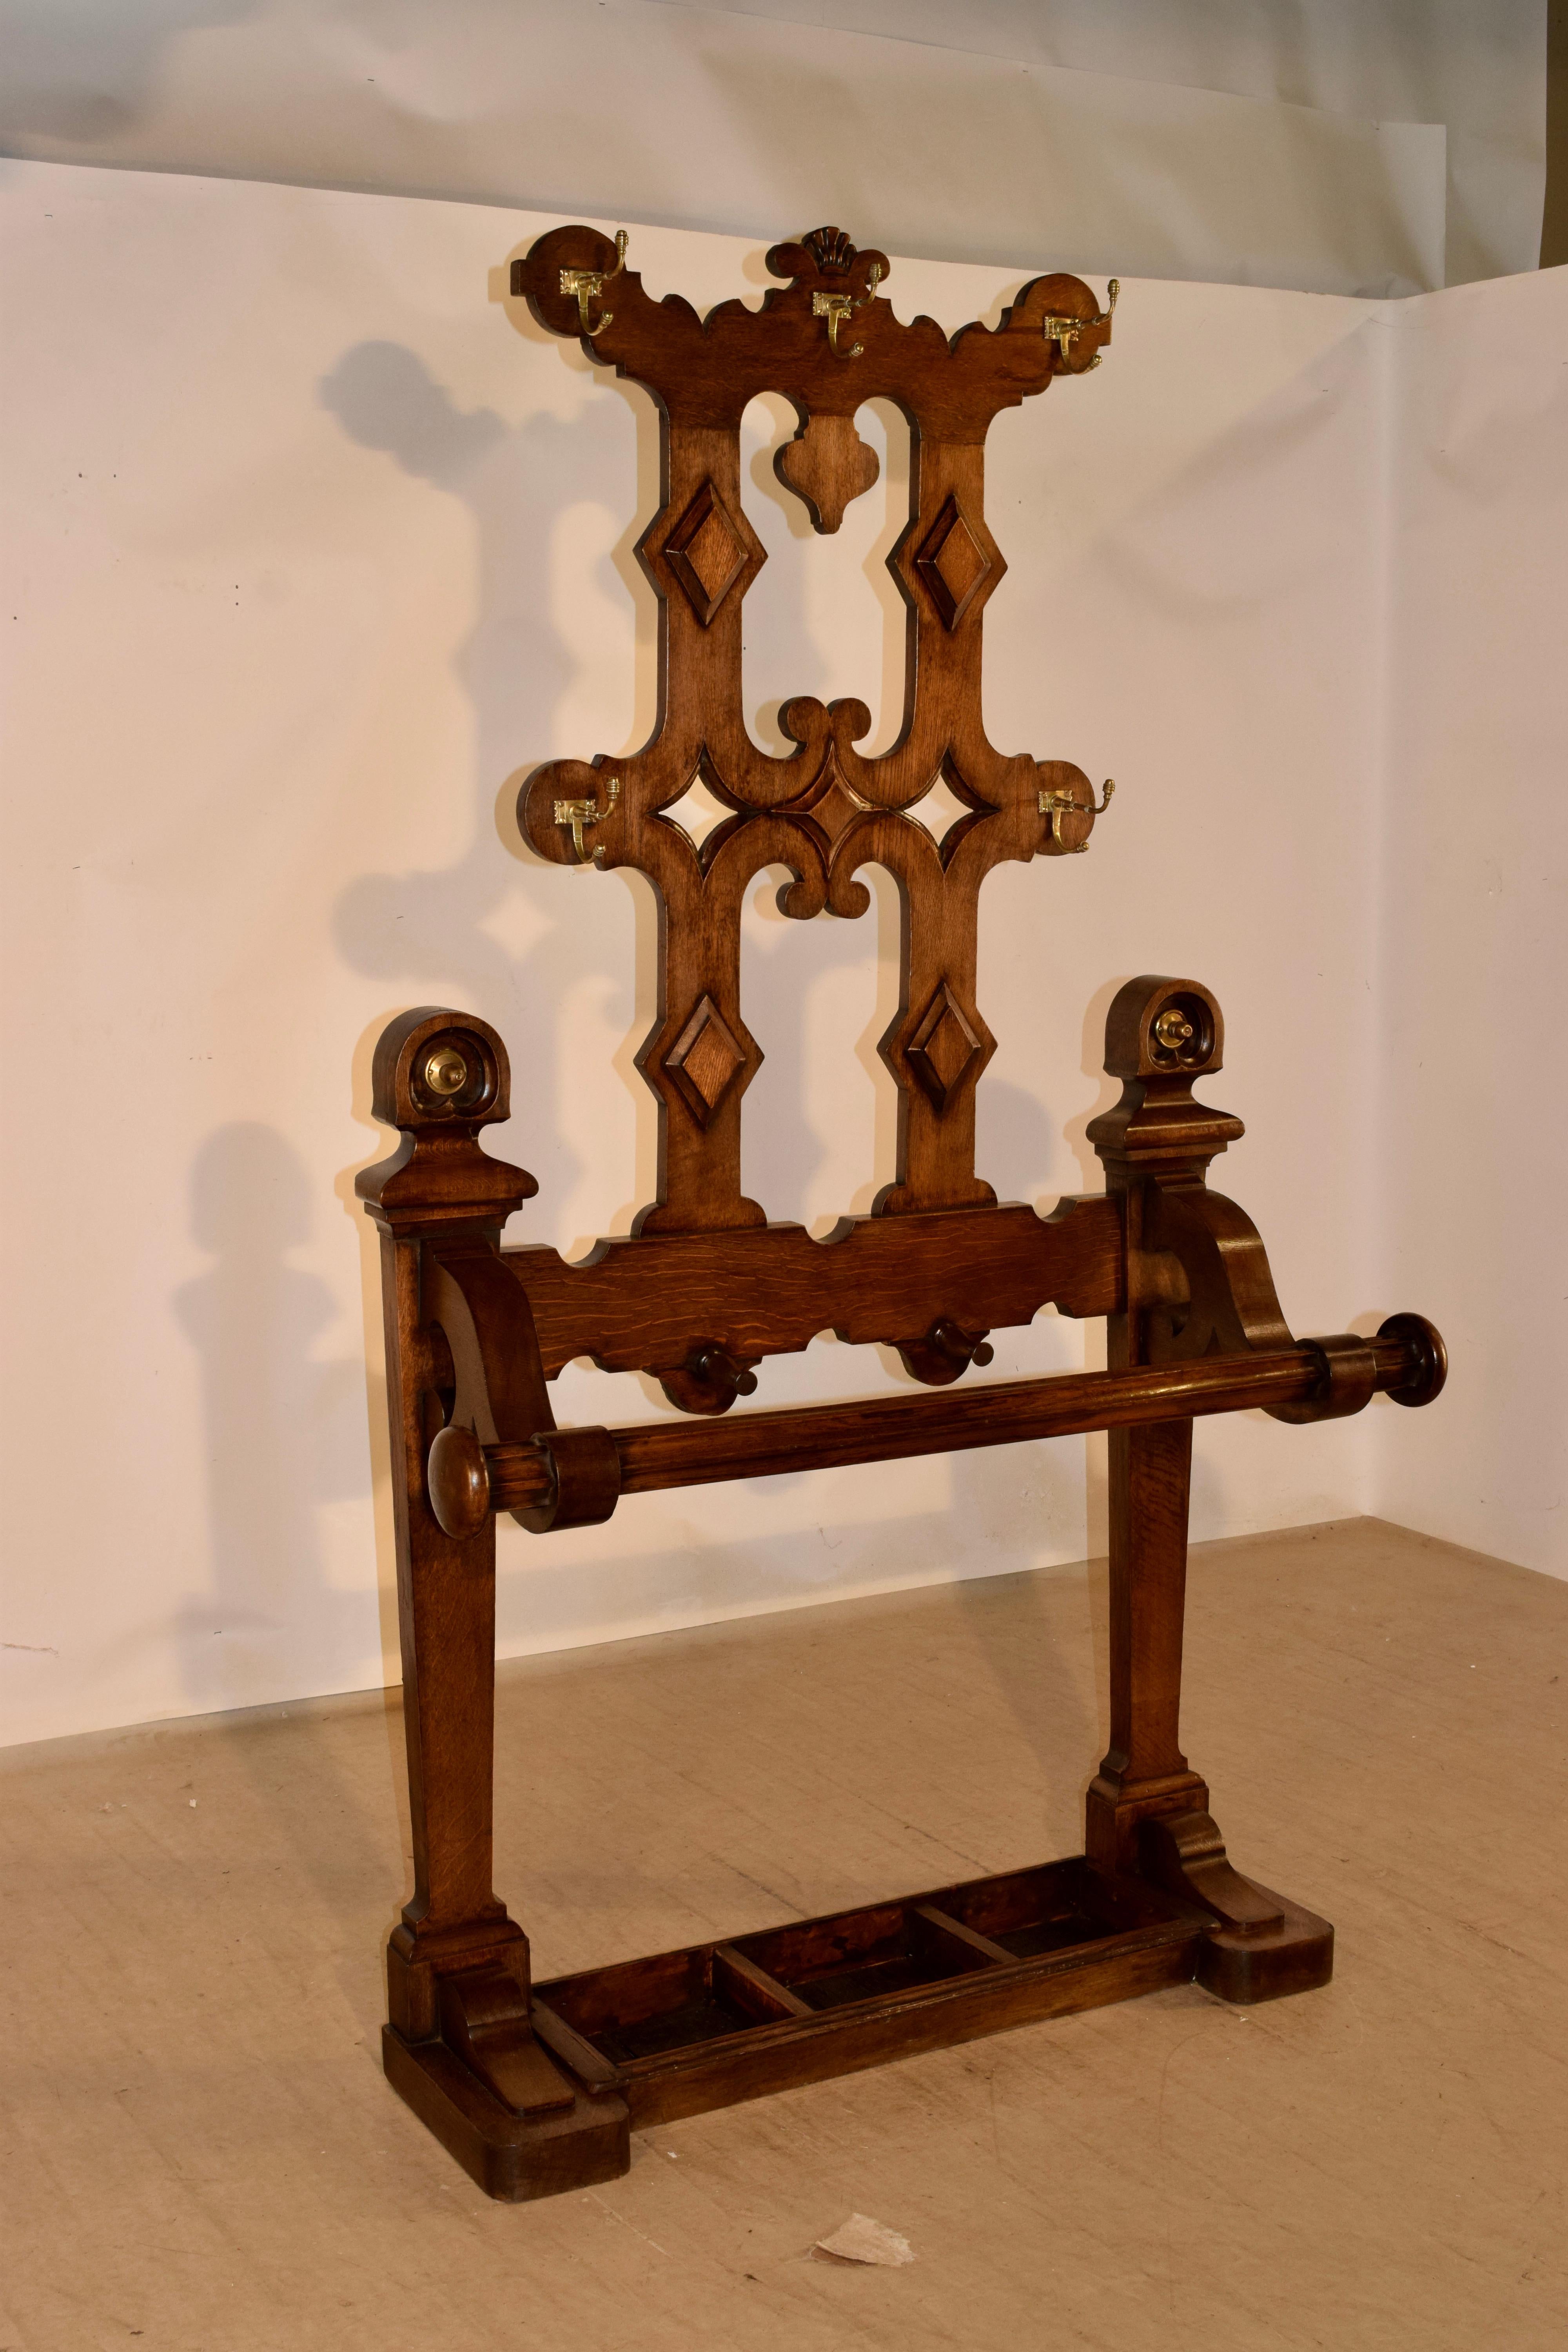 19th century English hall stand made from oak. It is a lovely scalloped and shaped piece with five hooks for coats or hats and has a large umbrella or cane stand at the base. there are two additional hooks at the bottom for umbrella or cane handles.